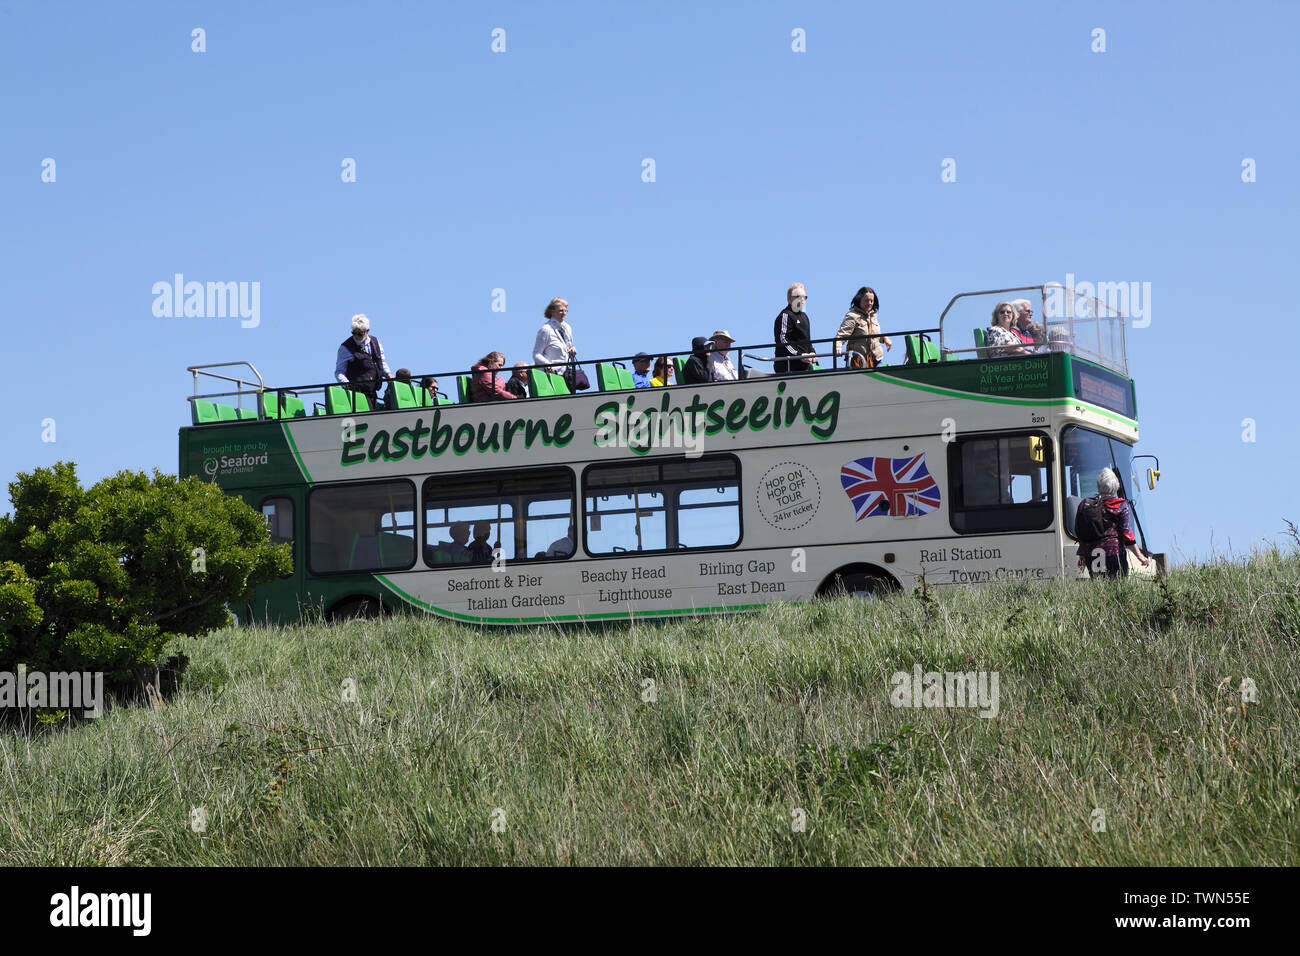 Eastbourne sightseeing bus a Beachy Head, East Sussex, Regno Unito Foto Stock